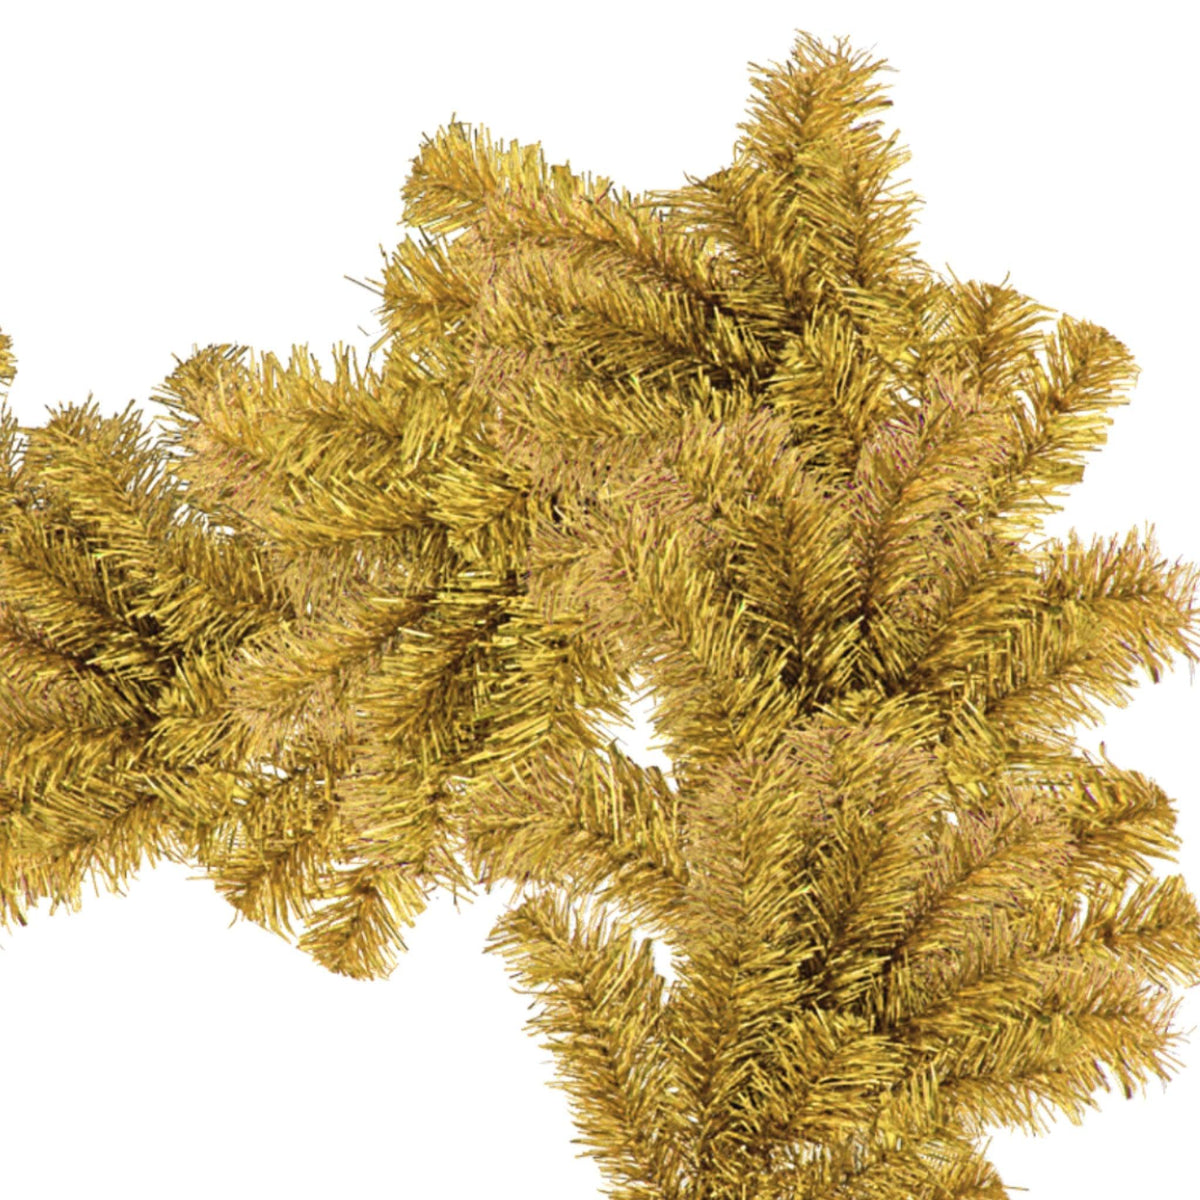 Shop for Lee Display's brand new 6FT Shiny Gold Tinsel Brush Garlands on sale at leedisplay.com.  Middle section